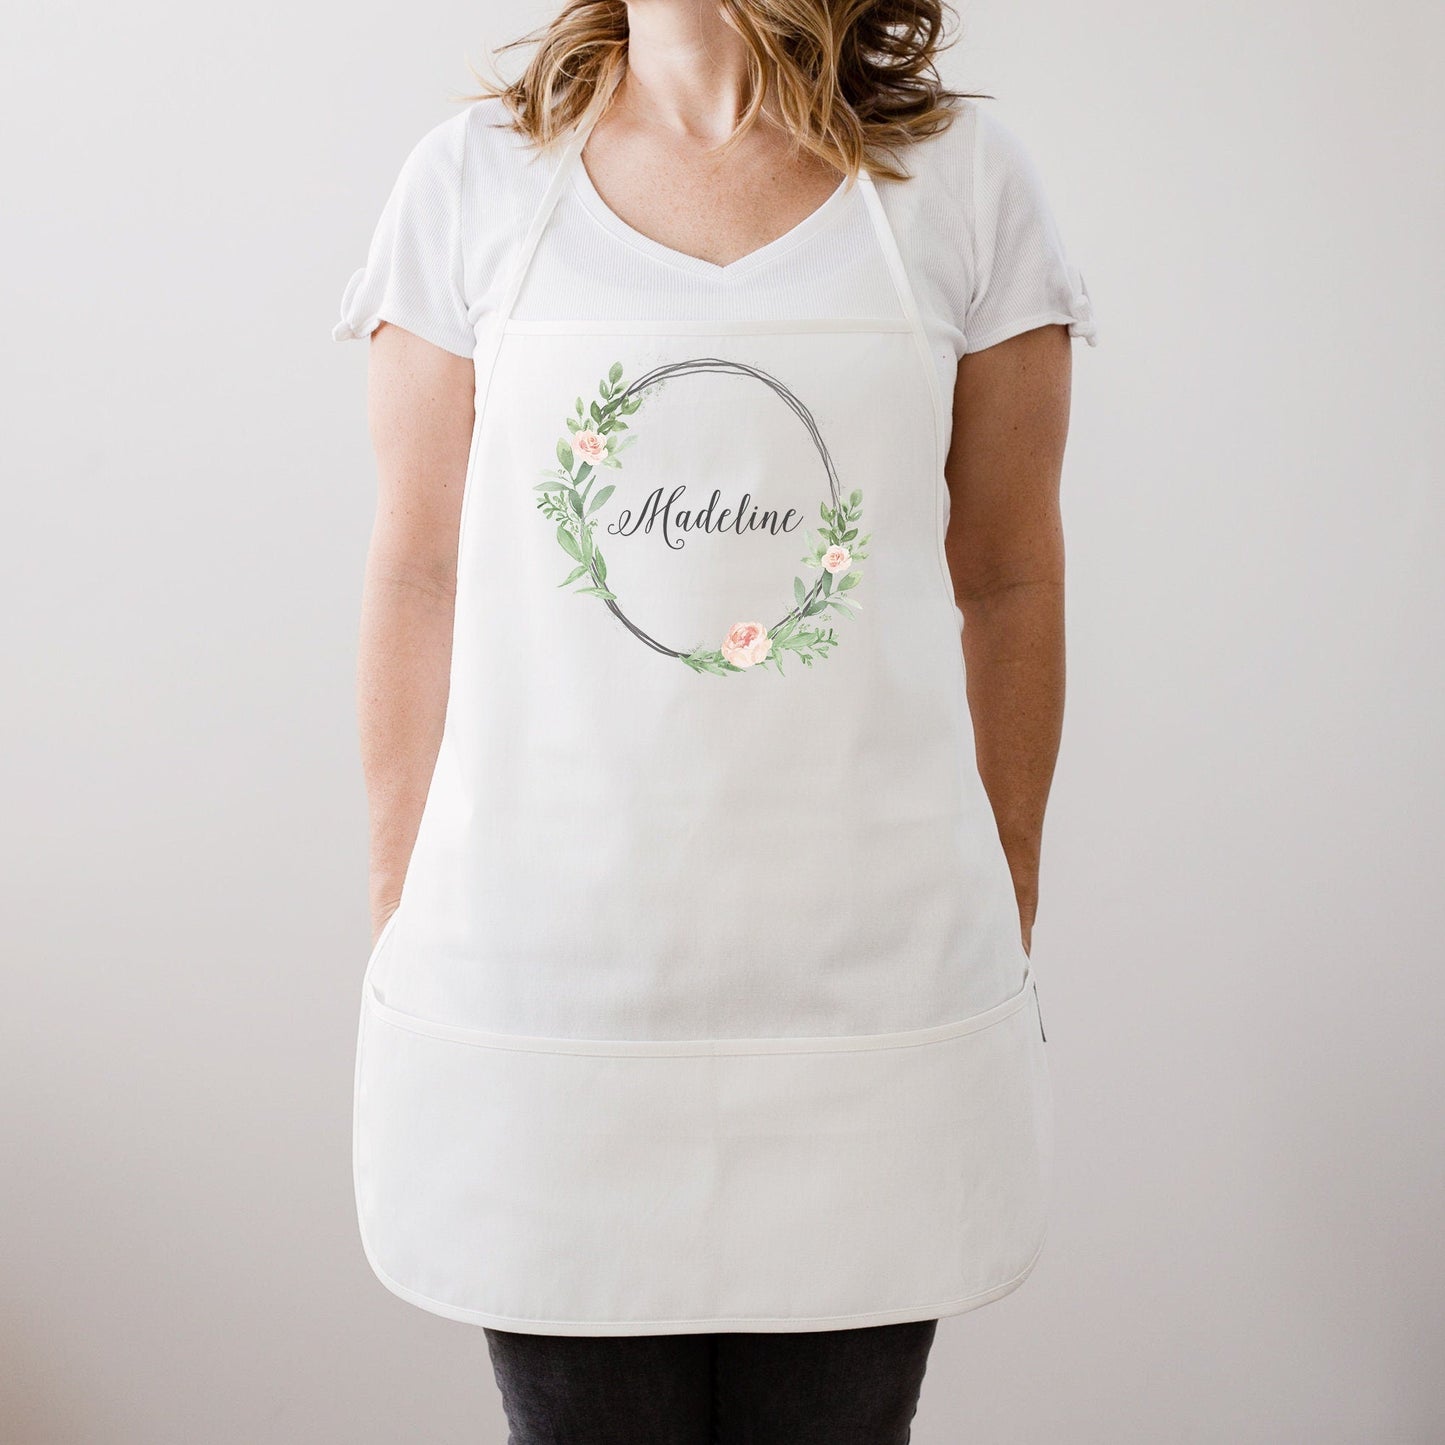 Load image into Gallery viewer, Floral Wreath Personalized Apron | Kitchen Apron | Personalized Bridesmaid Gift | Custom Apron Gift | Bridesmaid Gifts | Bridal Party Gift
